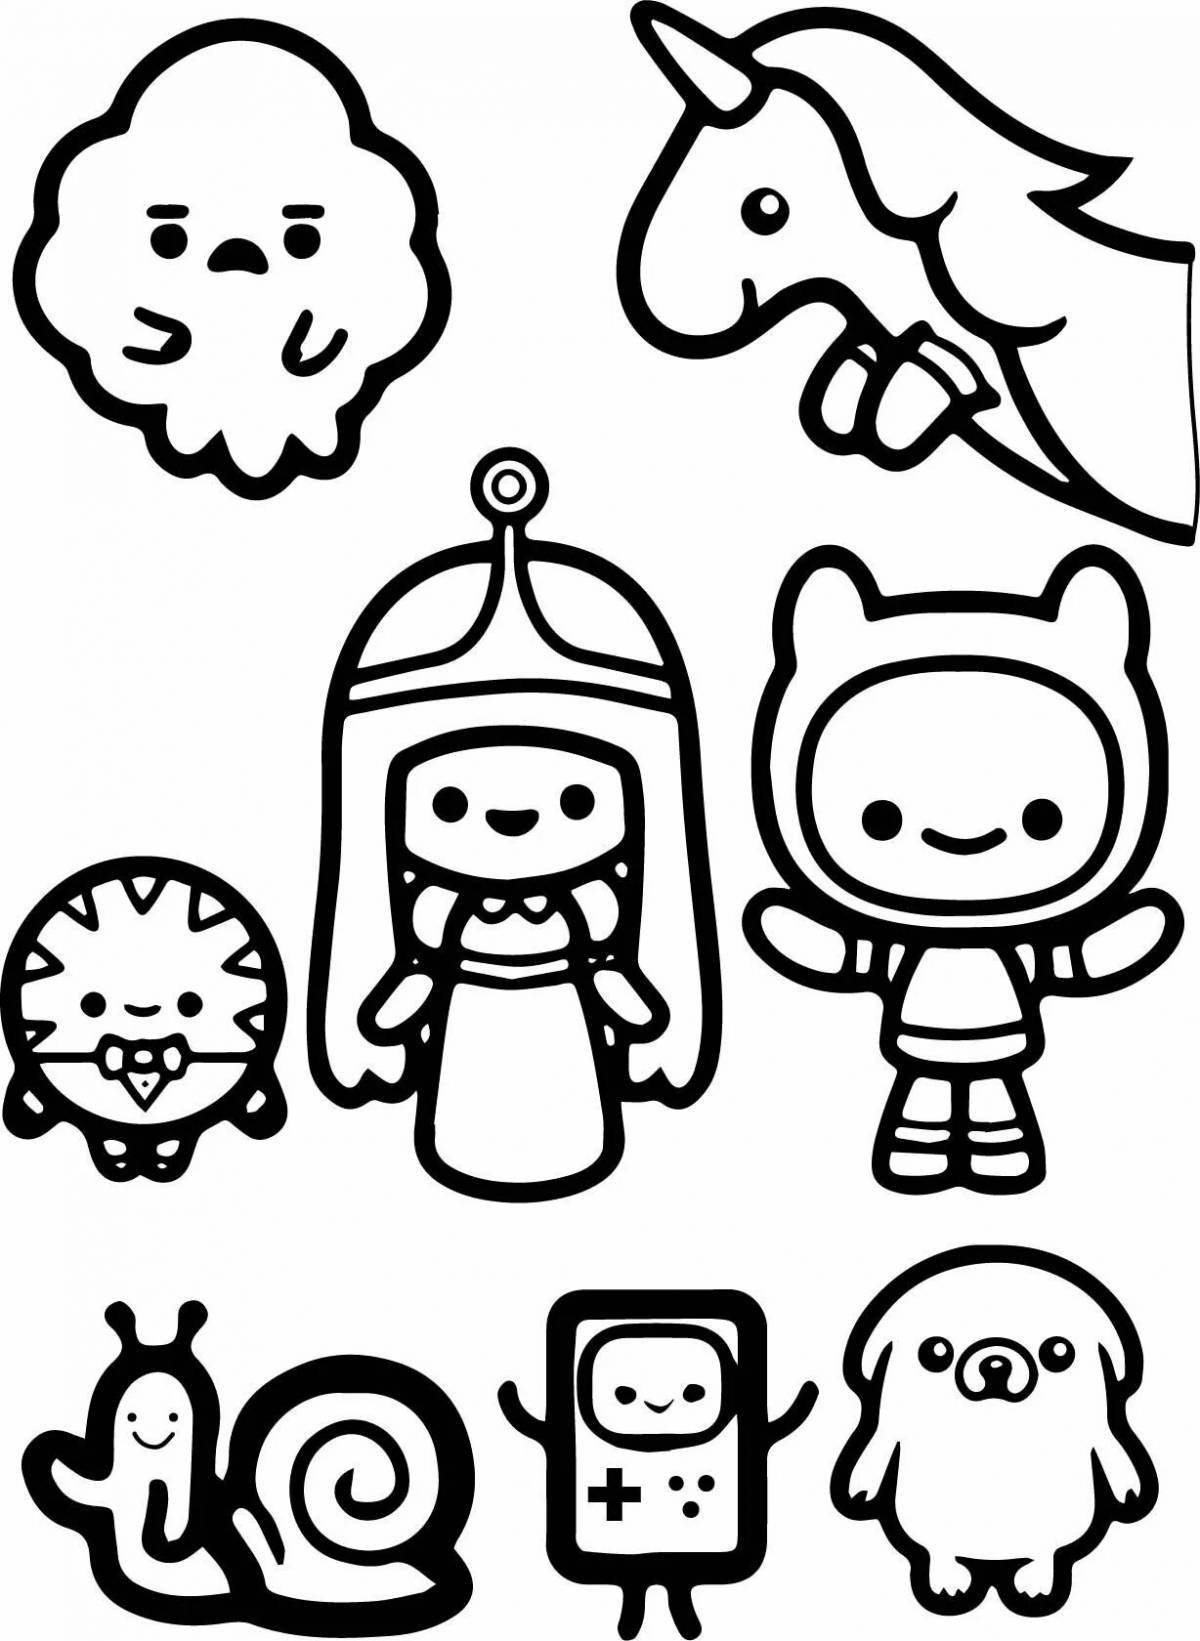 Magic coloring pages for stickers